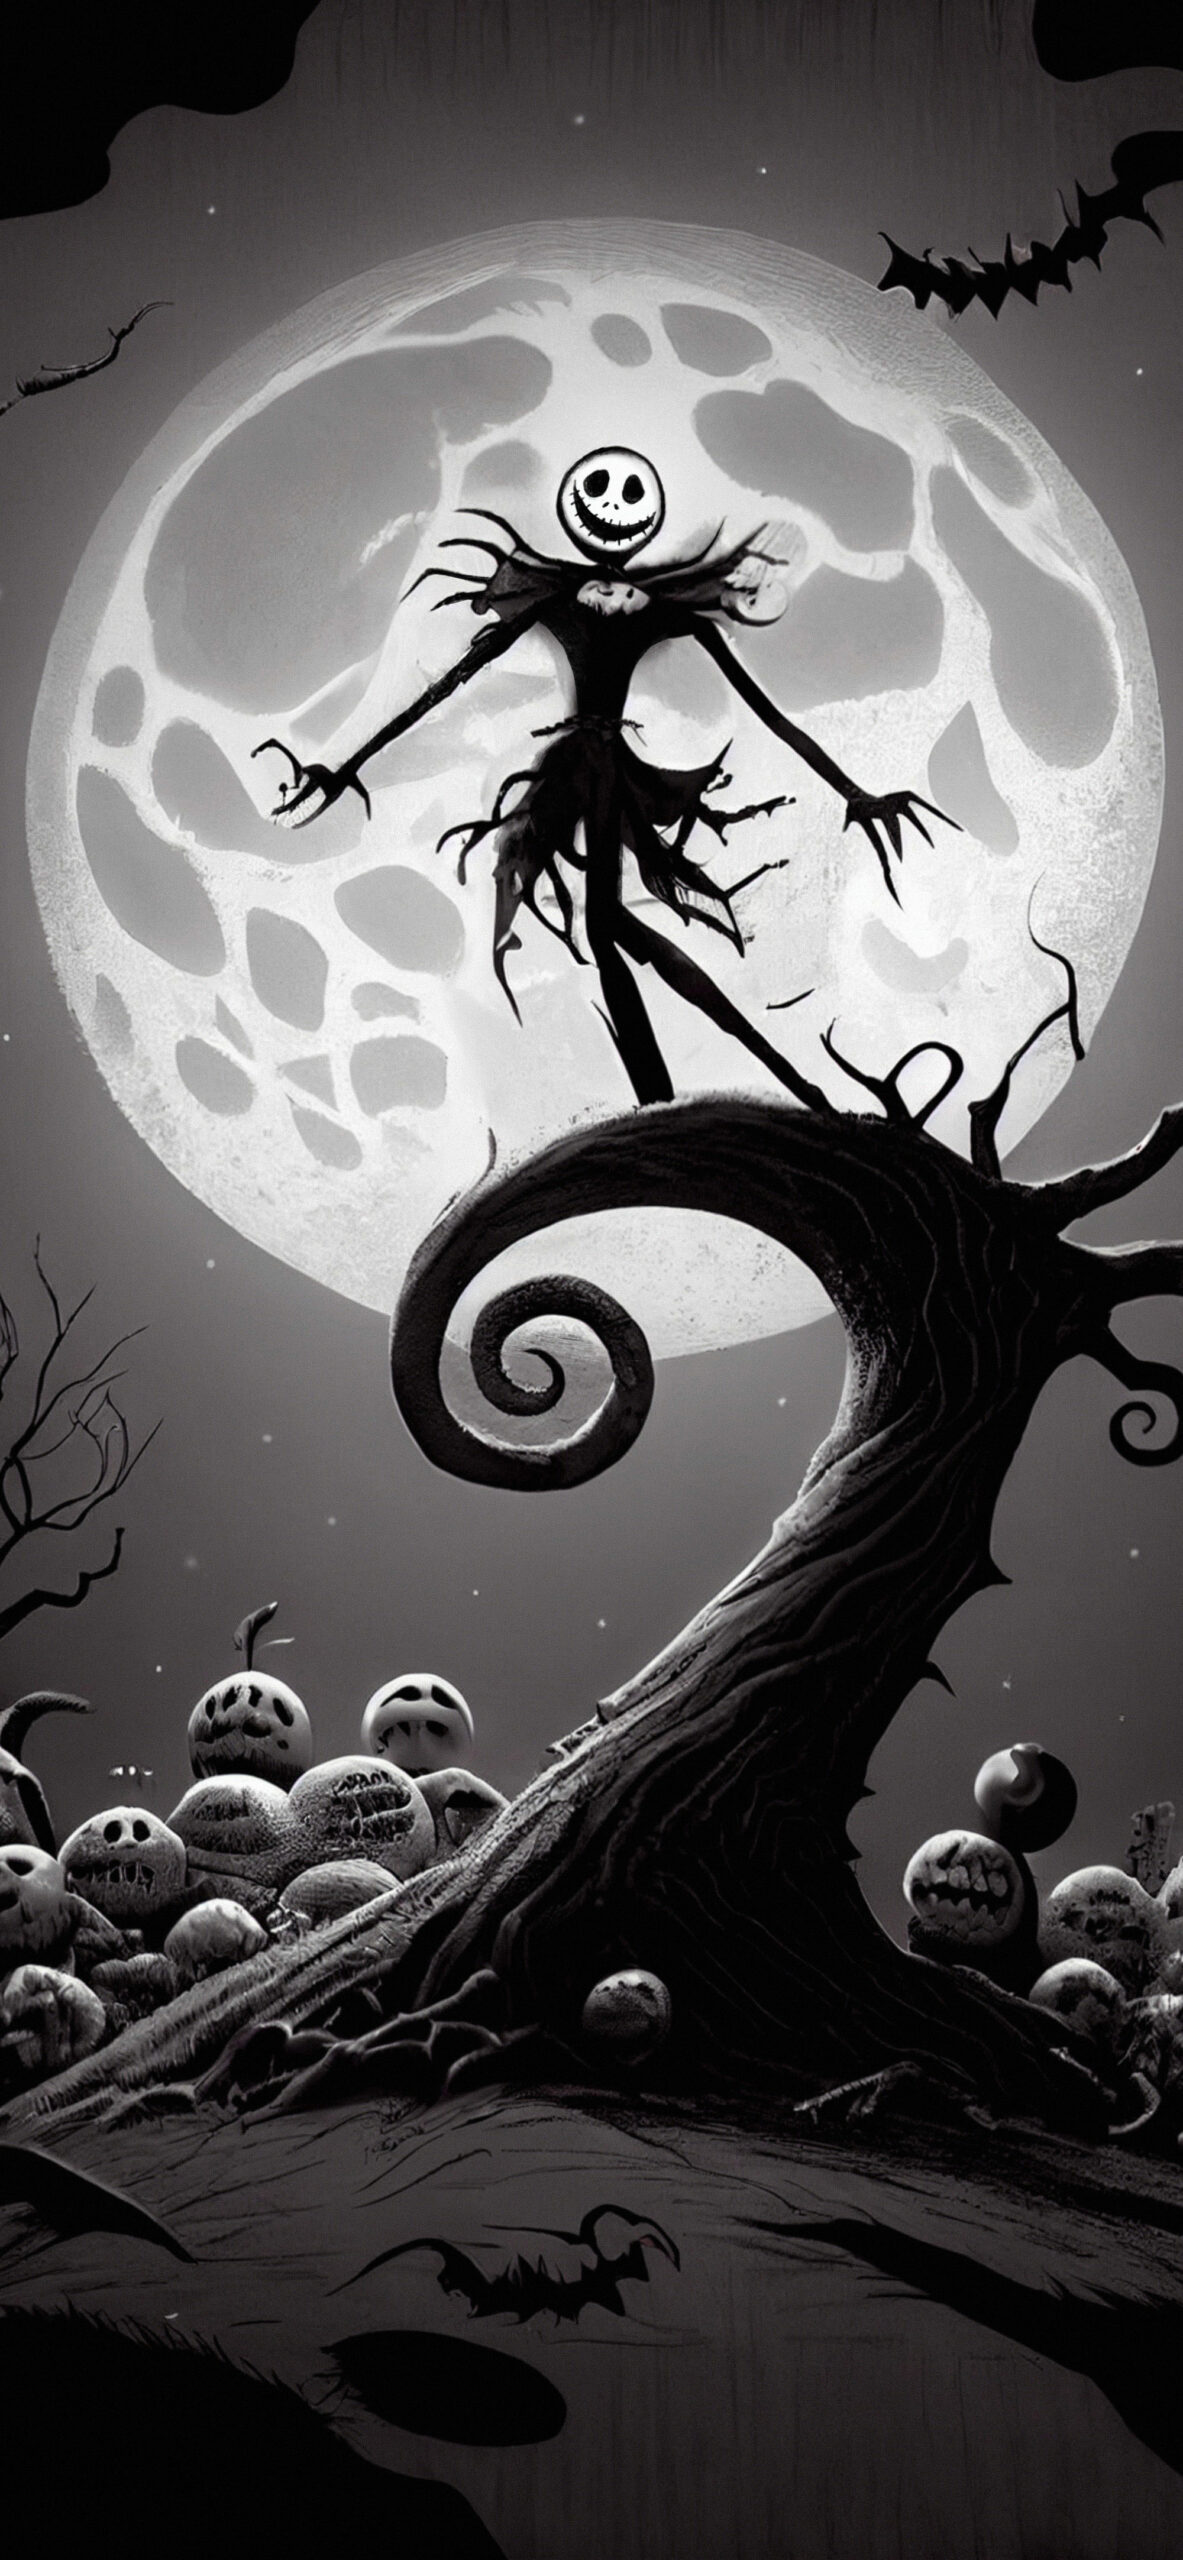 the nightmare before christmas aesthetic wallpaper